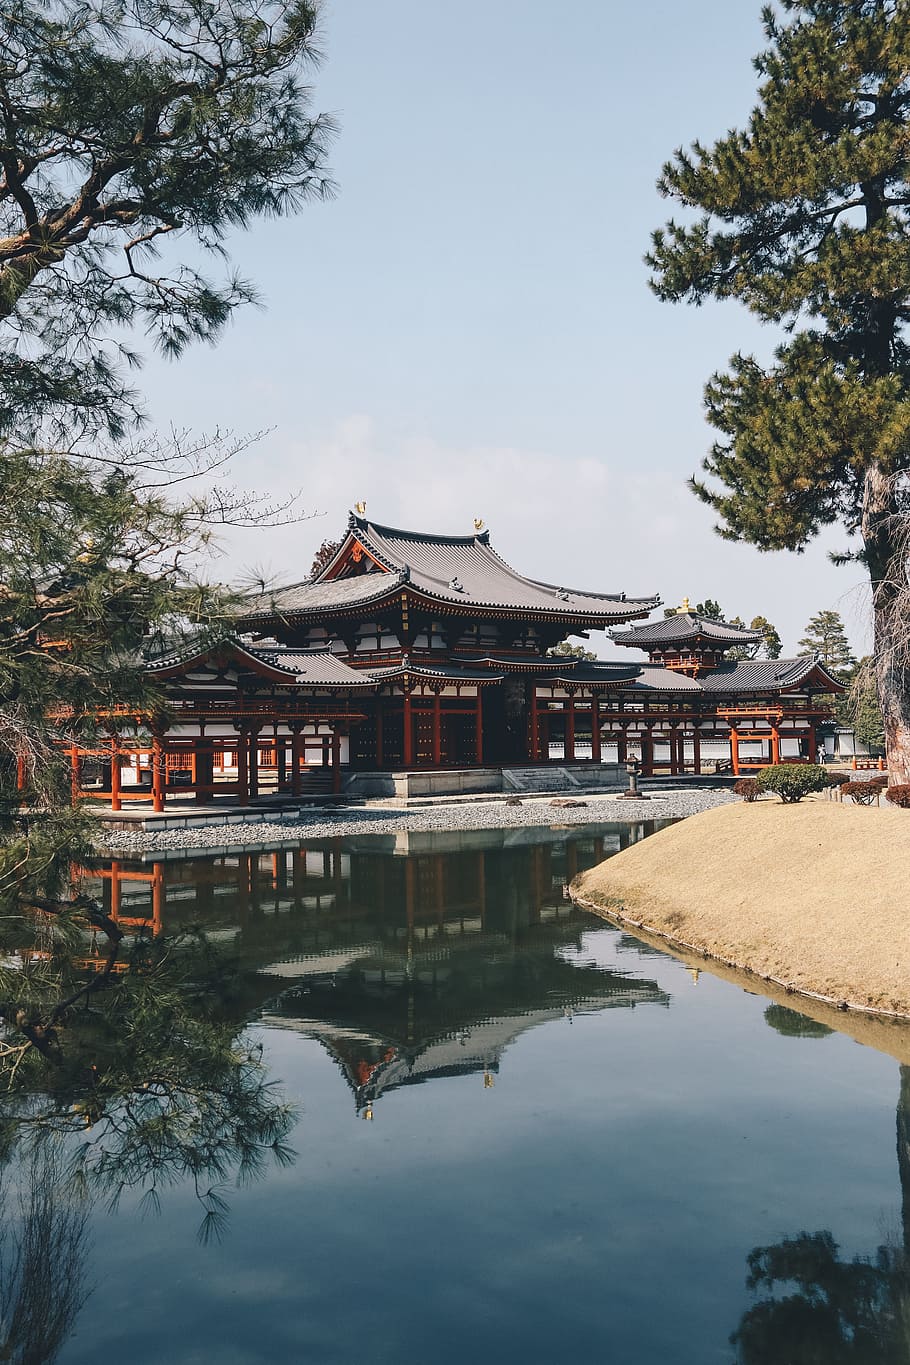 temple in front of calm body of water, building, tree, architecture